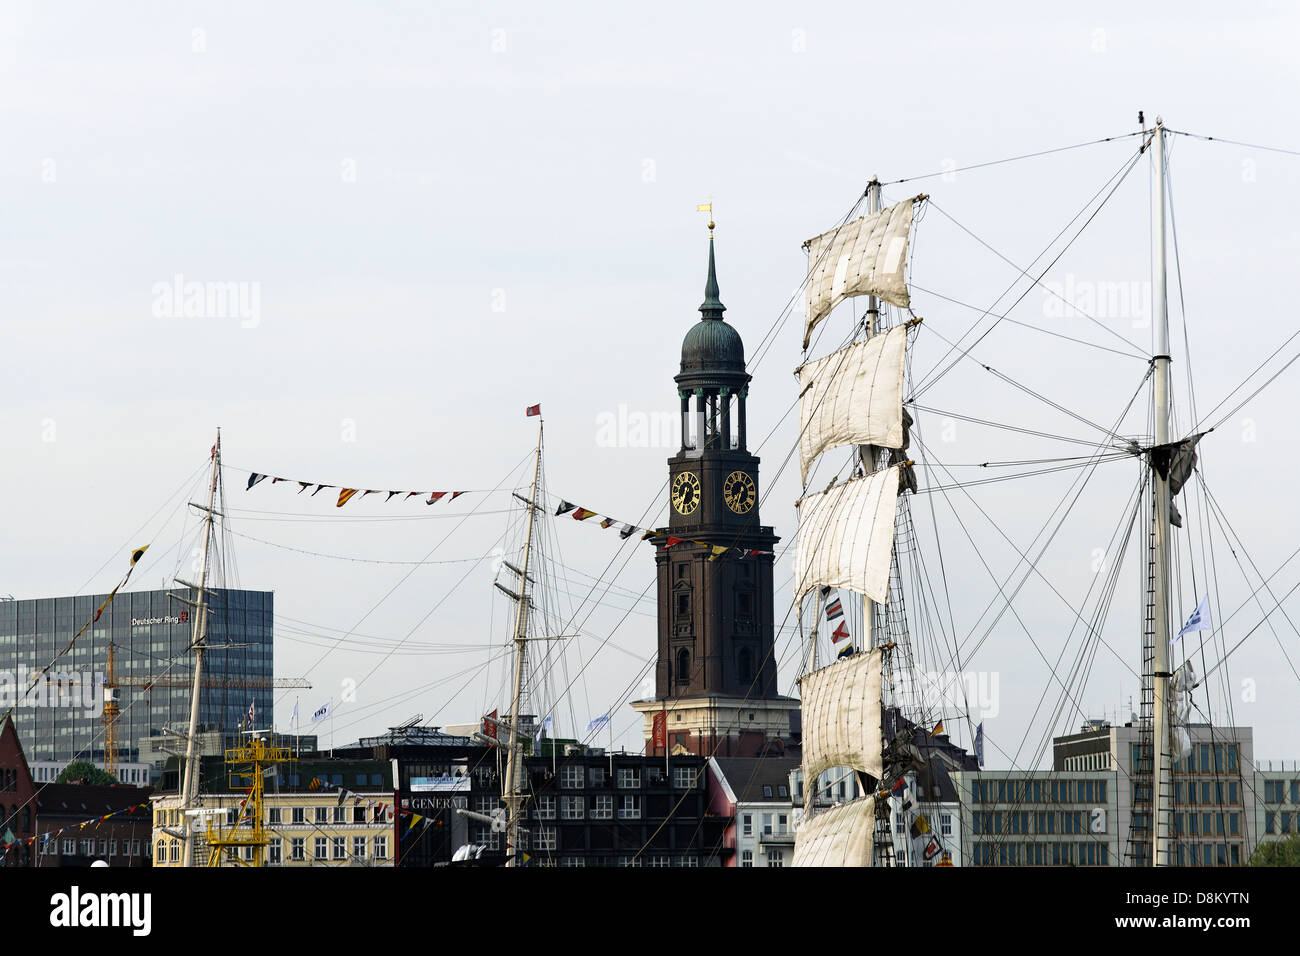 Mast of a sailing ship in front of St. Michaelis church, Hamburg, Germany Stock Photo